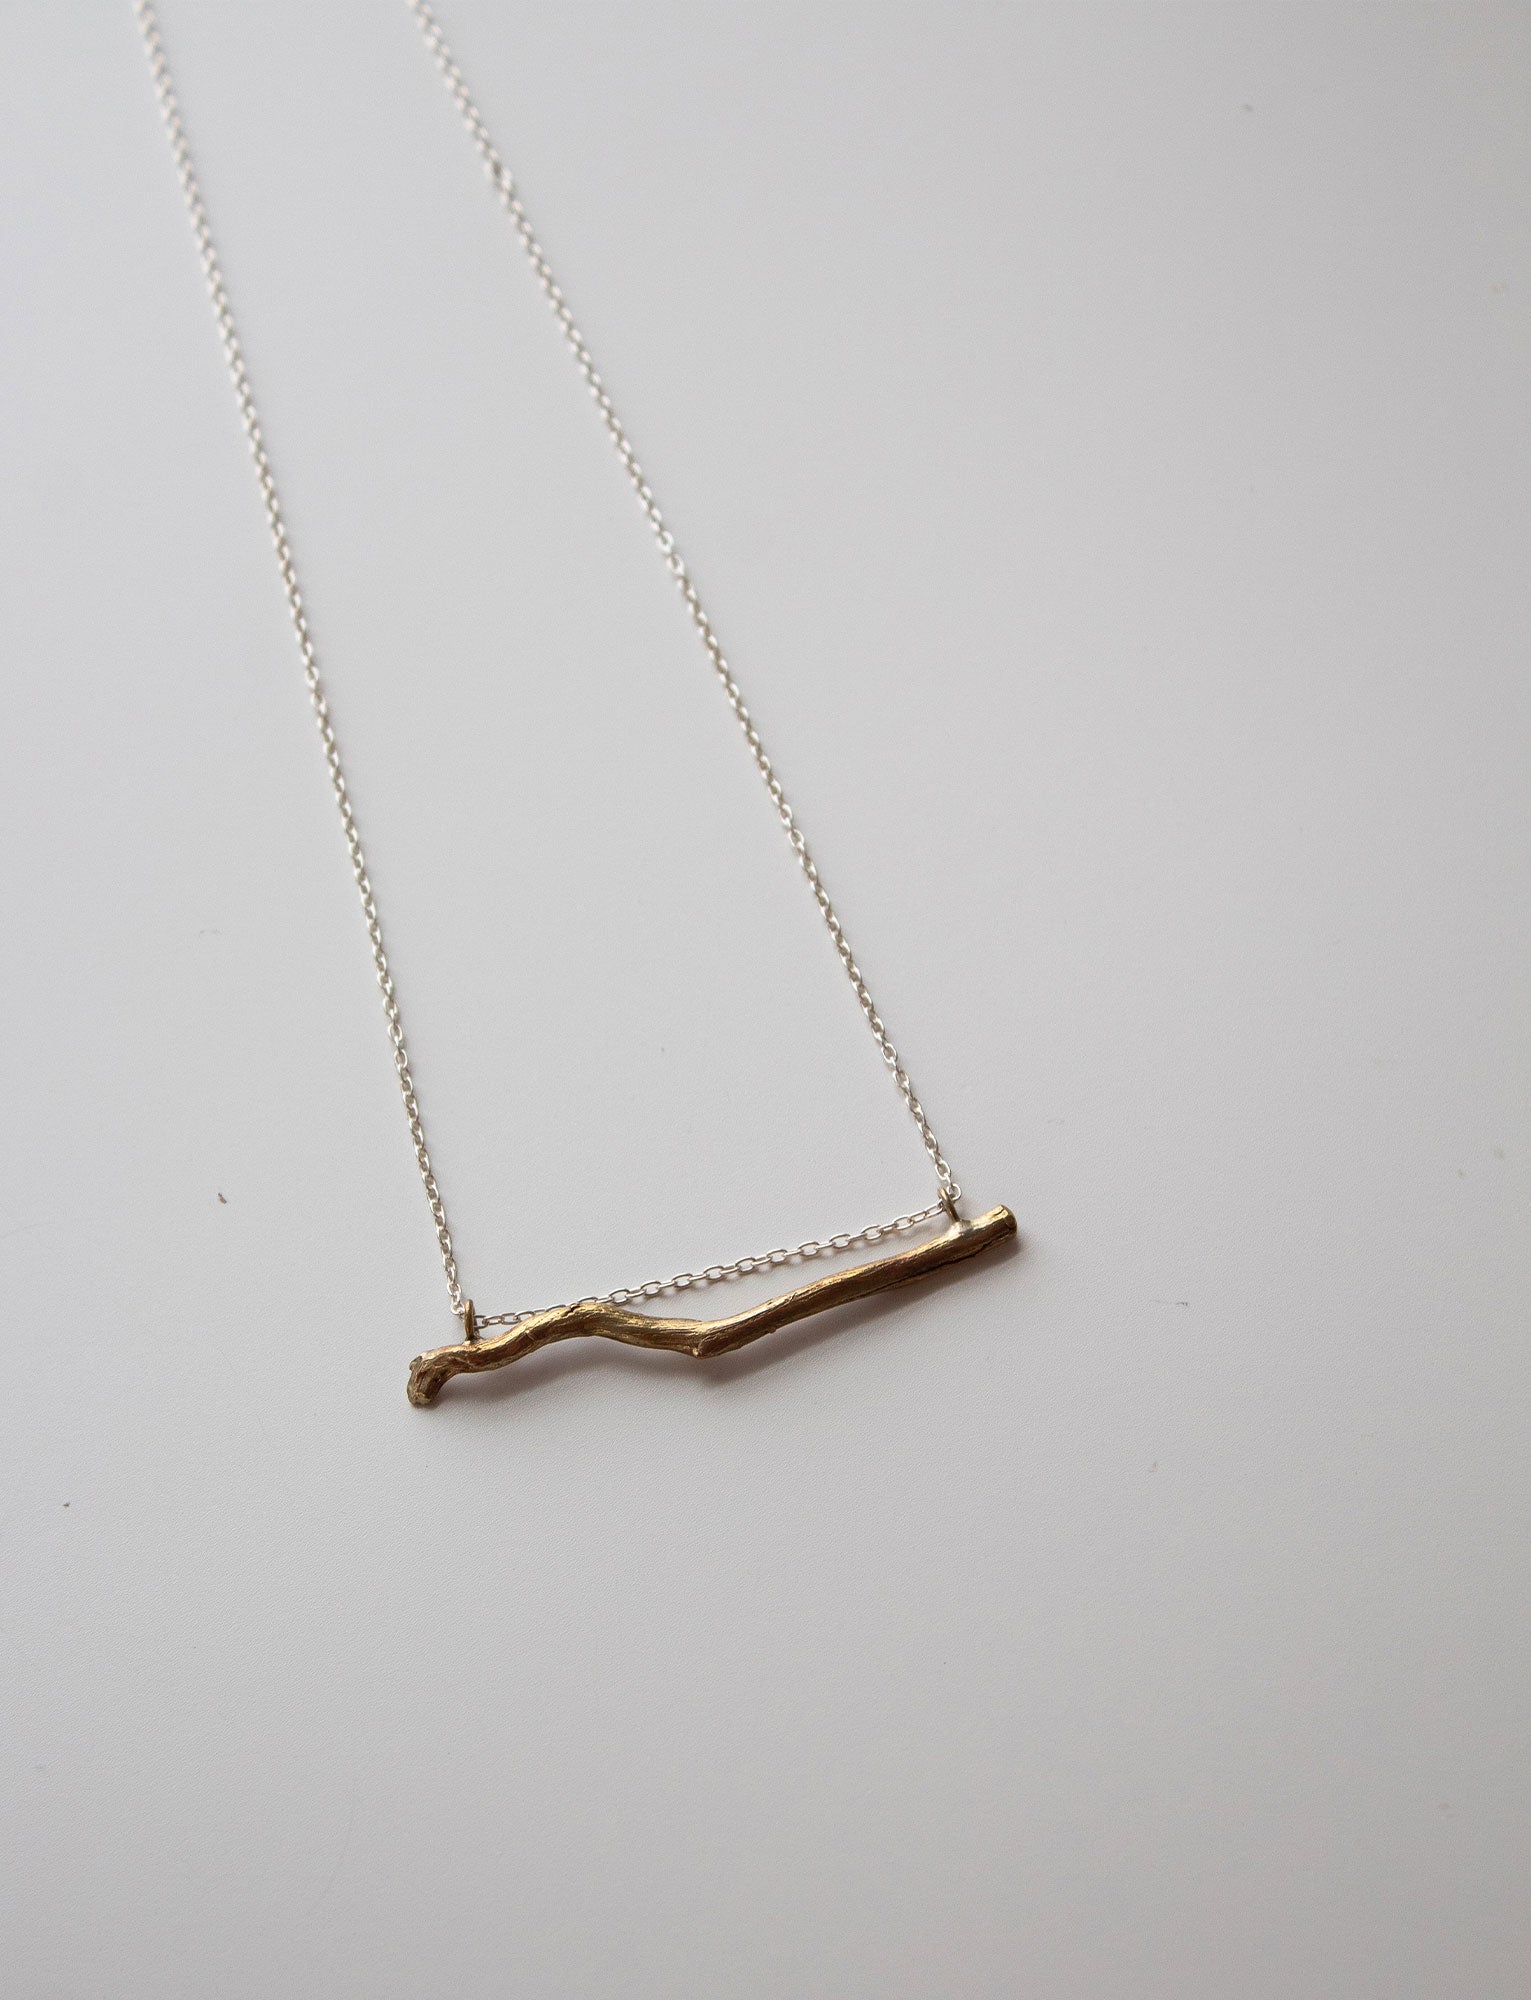 Felise Bronze Driftwood Necklace with Sterling Silver Chain